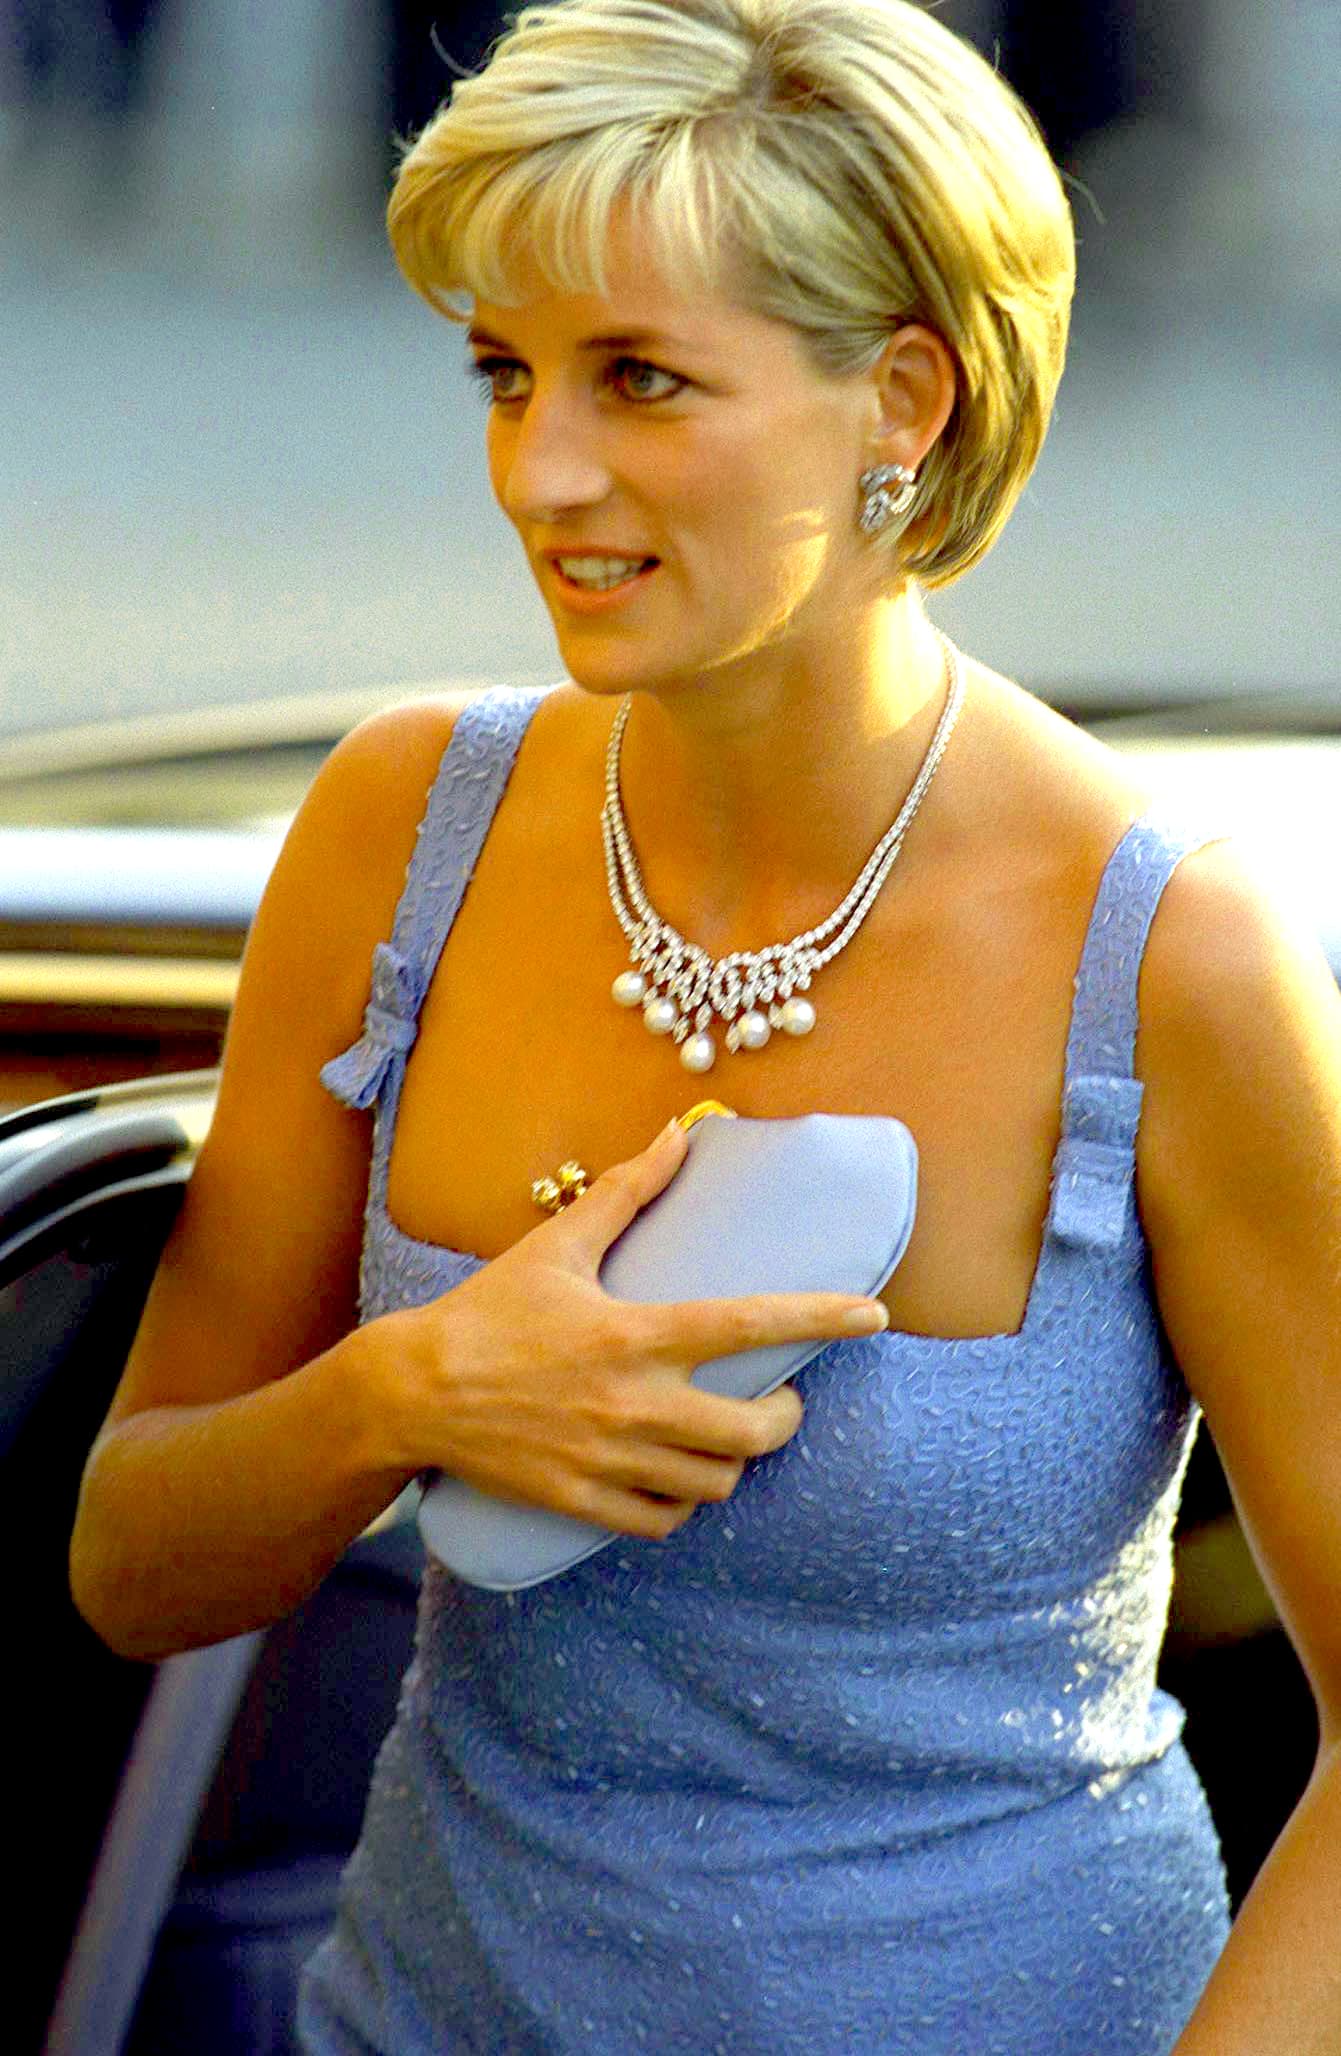 The story behind the picture: Why Diana always wore a clutch bag